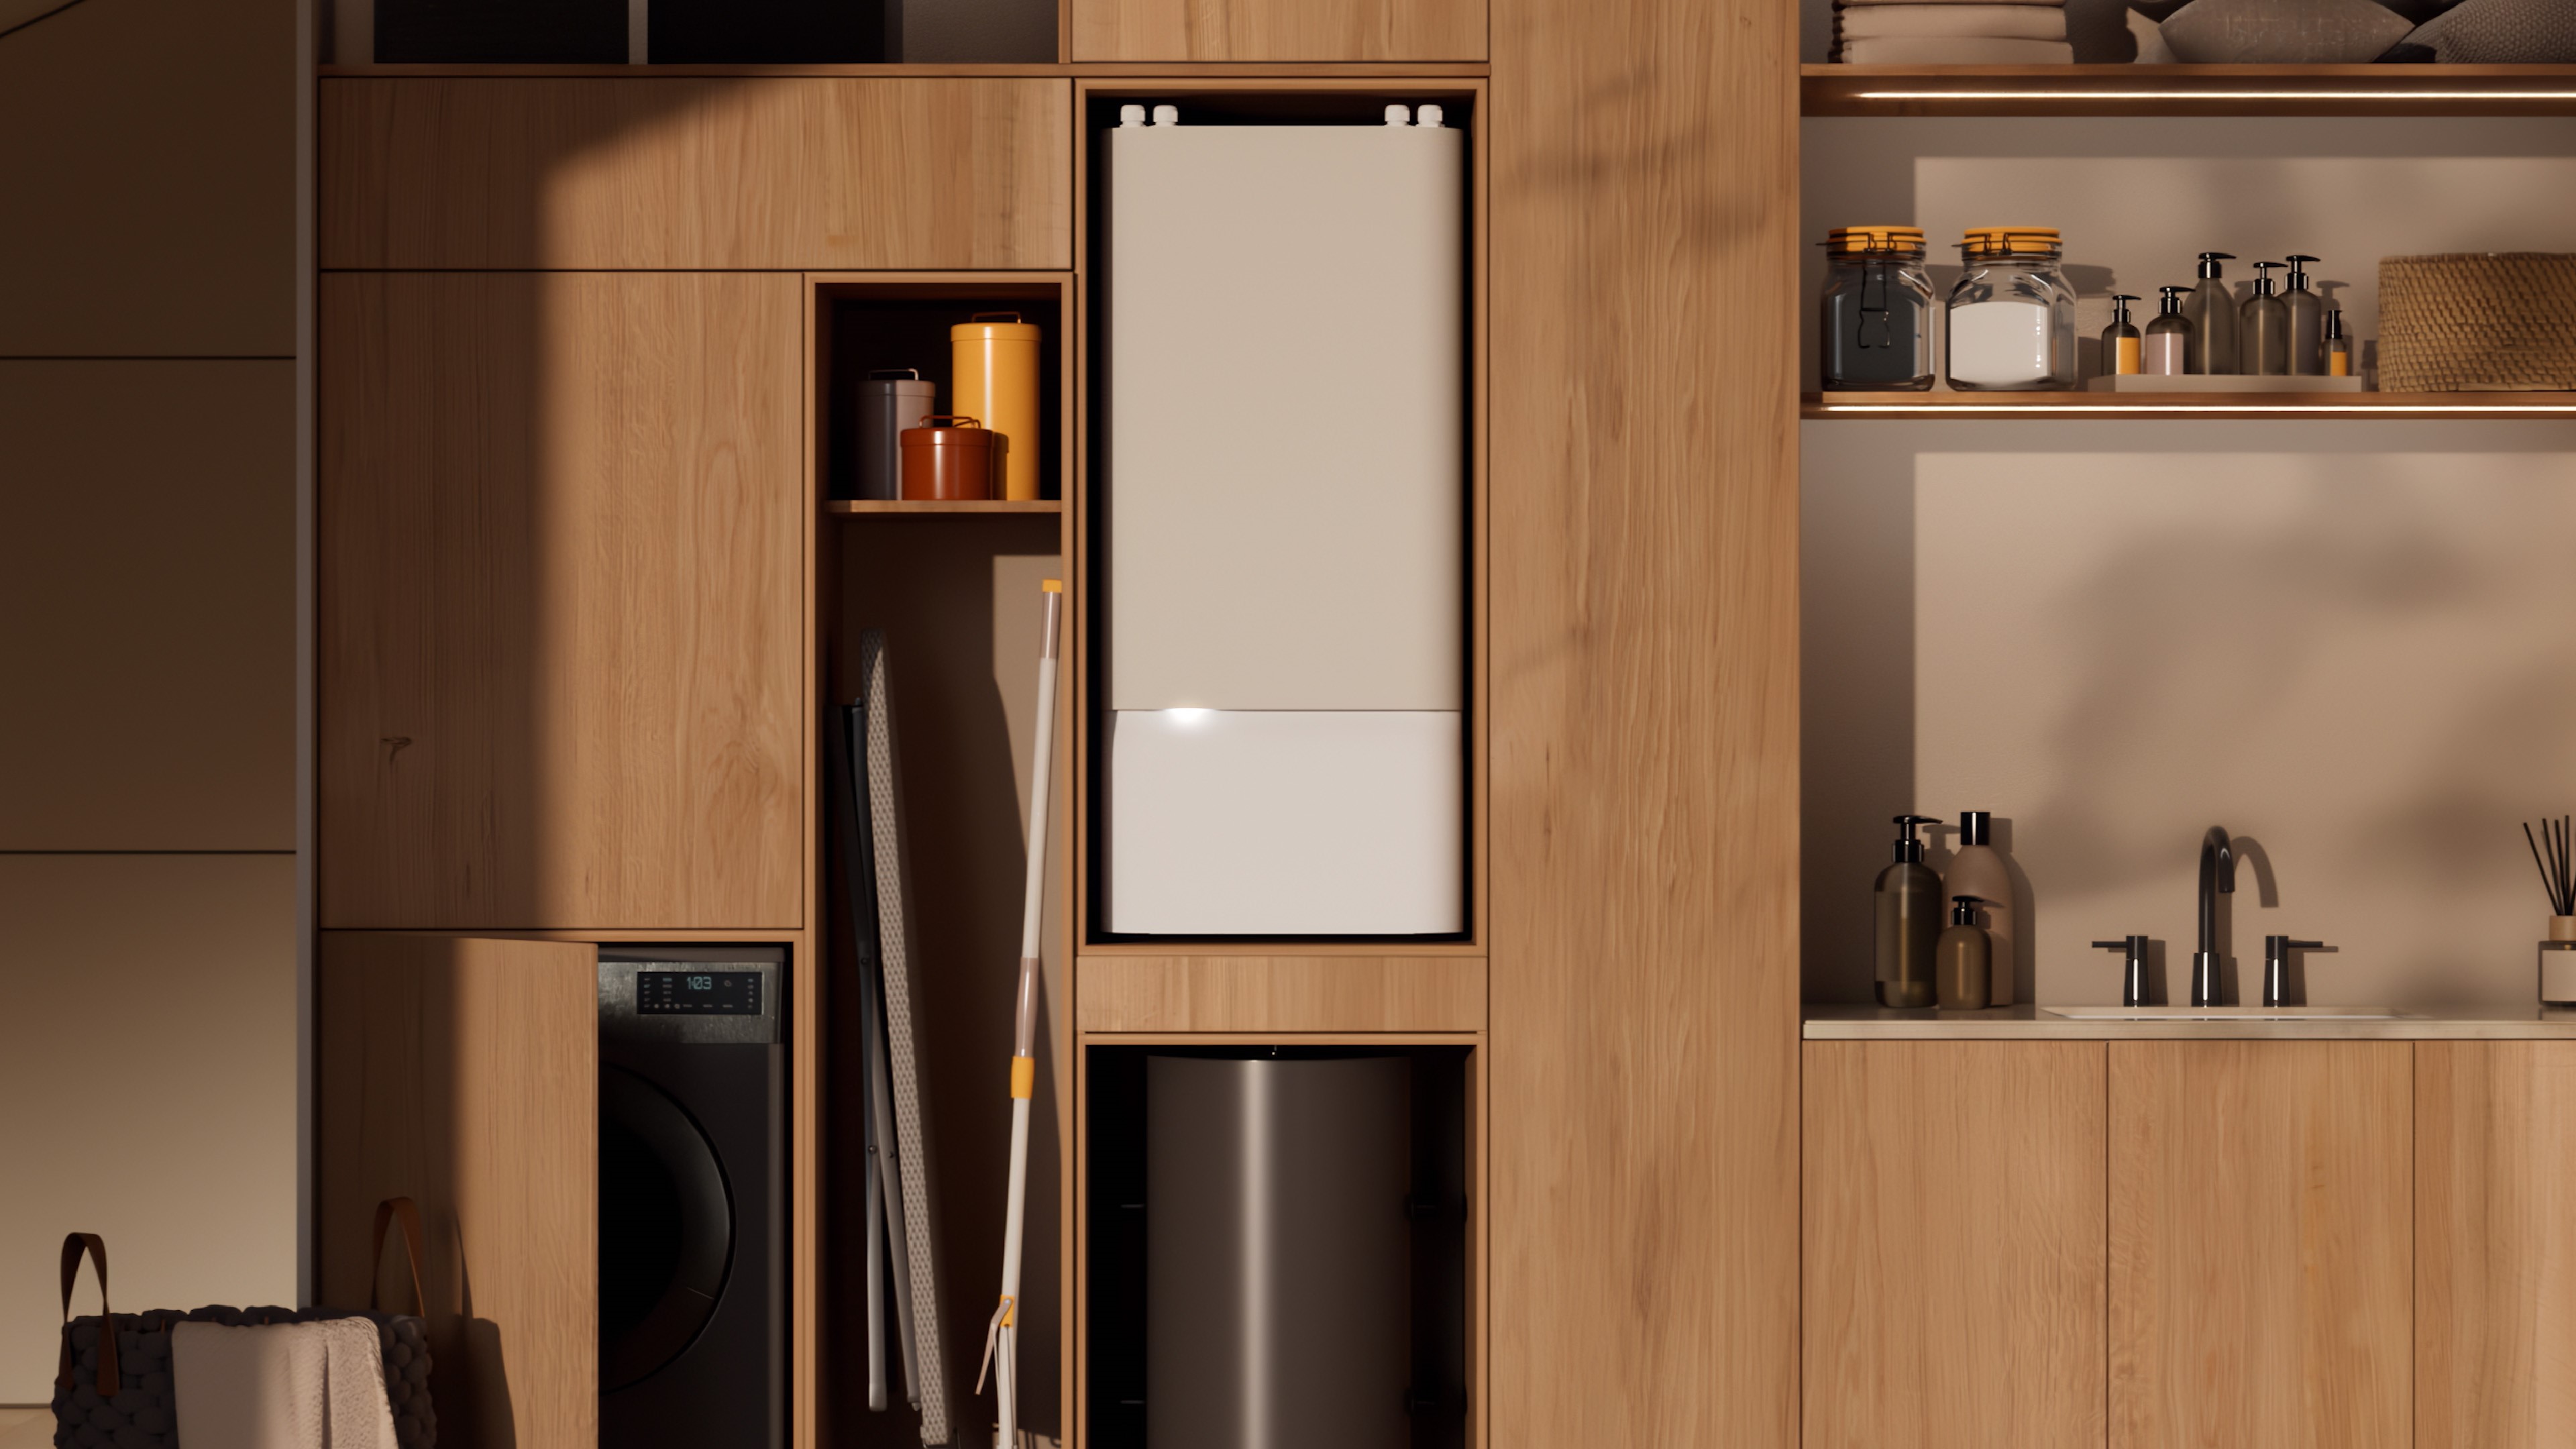 Indoor heat pump kit integrated into kitchen units (Aira/PA)